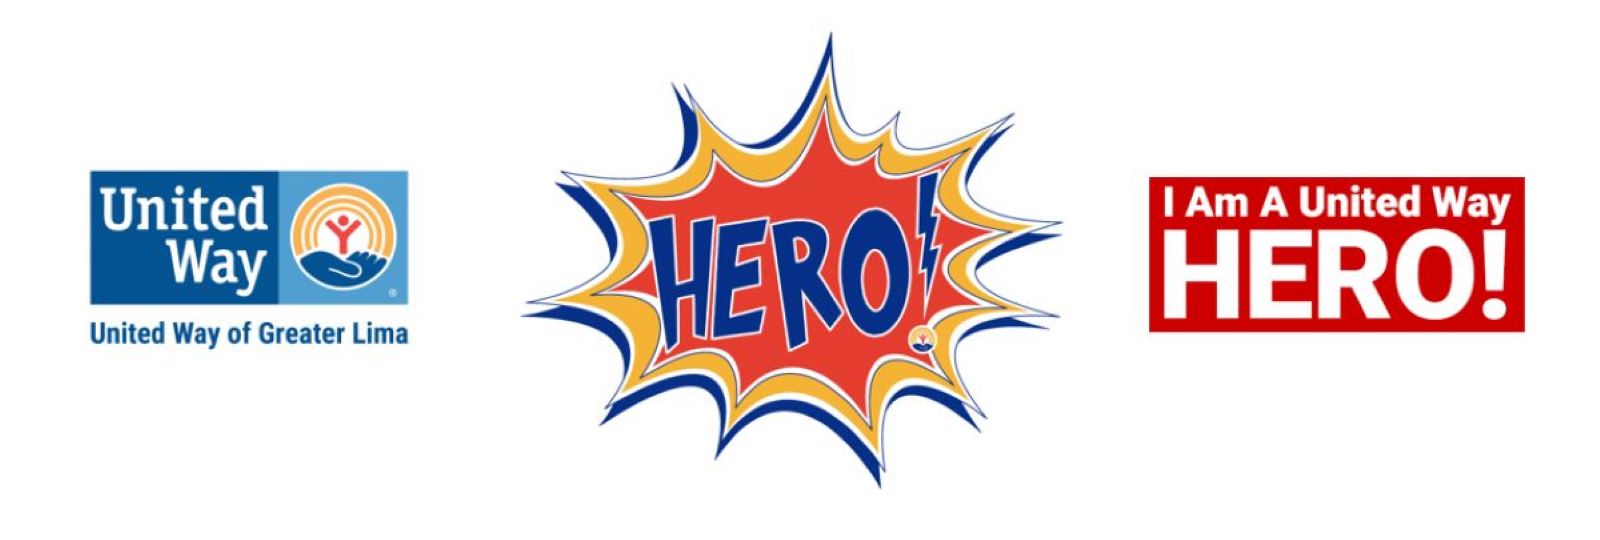 United Way Hero Campaign banner